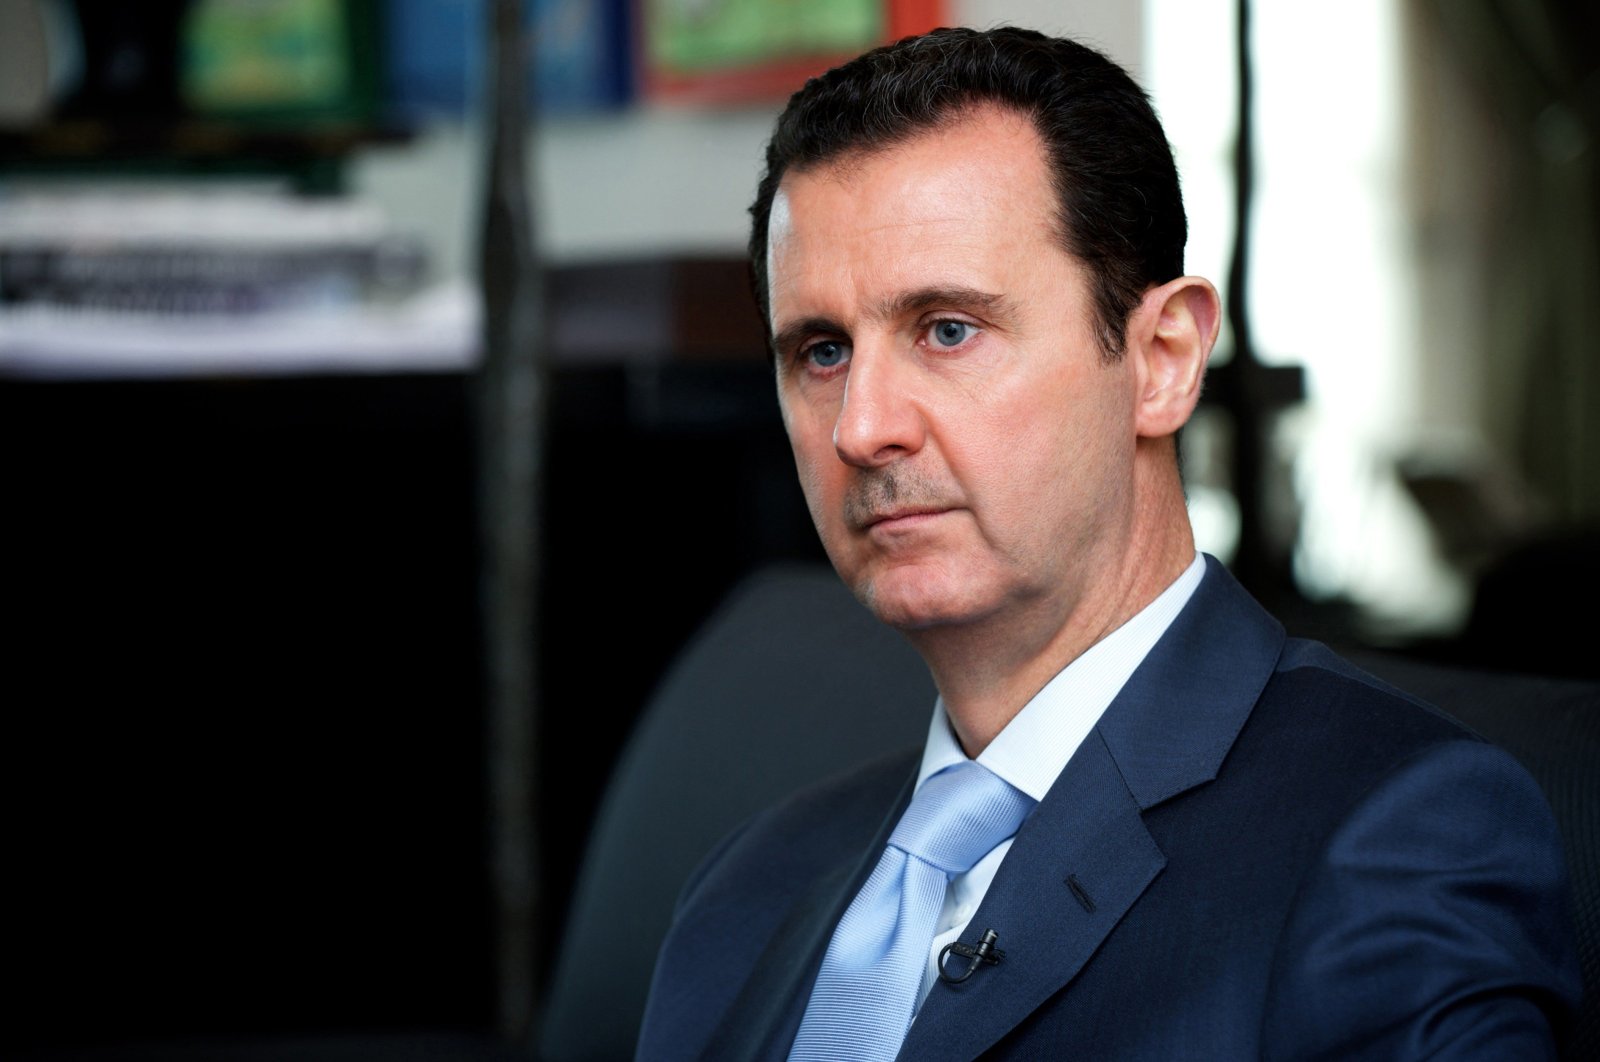 A handout picture released by the Syrian Arab News Agency (SANA) shows Bashar Assad giving an interview to the Eterarna Novina Czech newspaper in Damascus on Jan. 15, 2015. (AFP Photo)